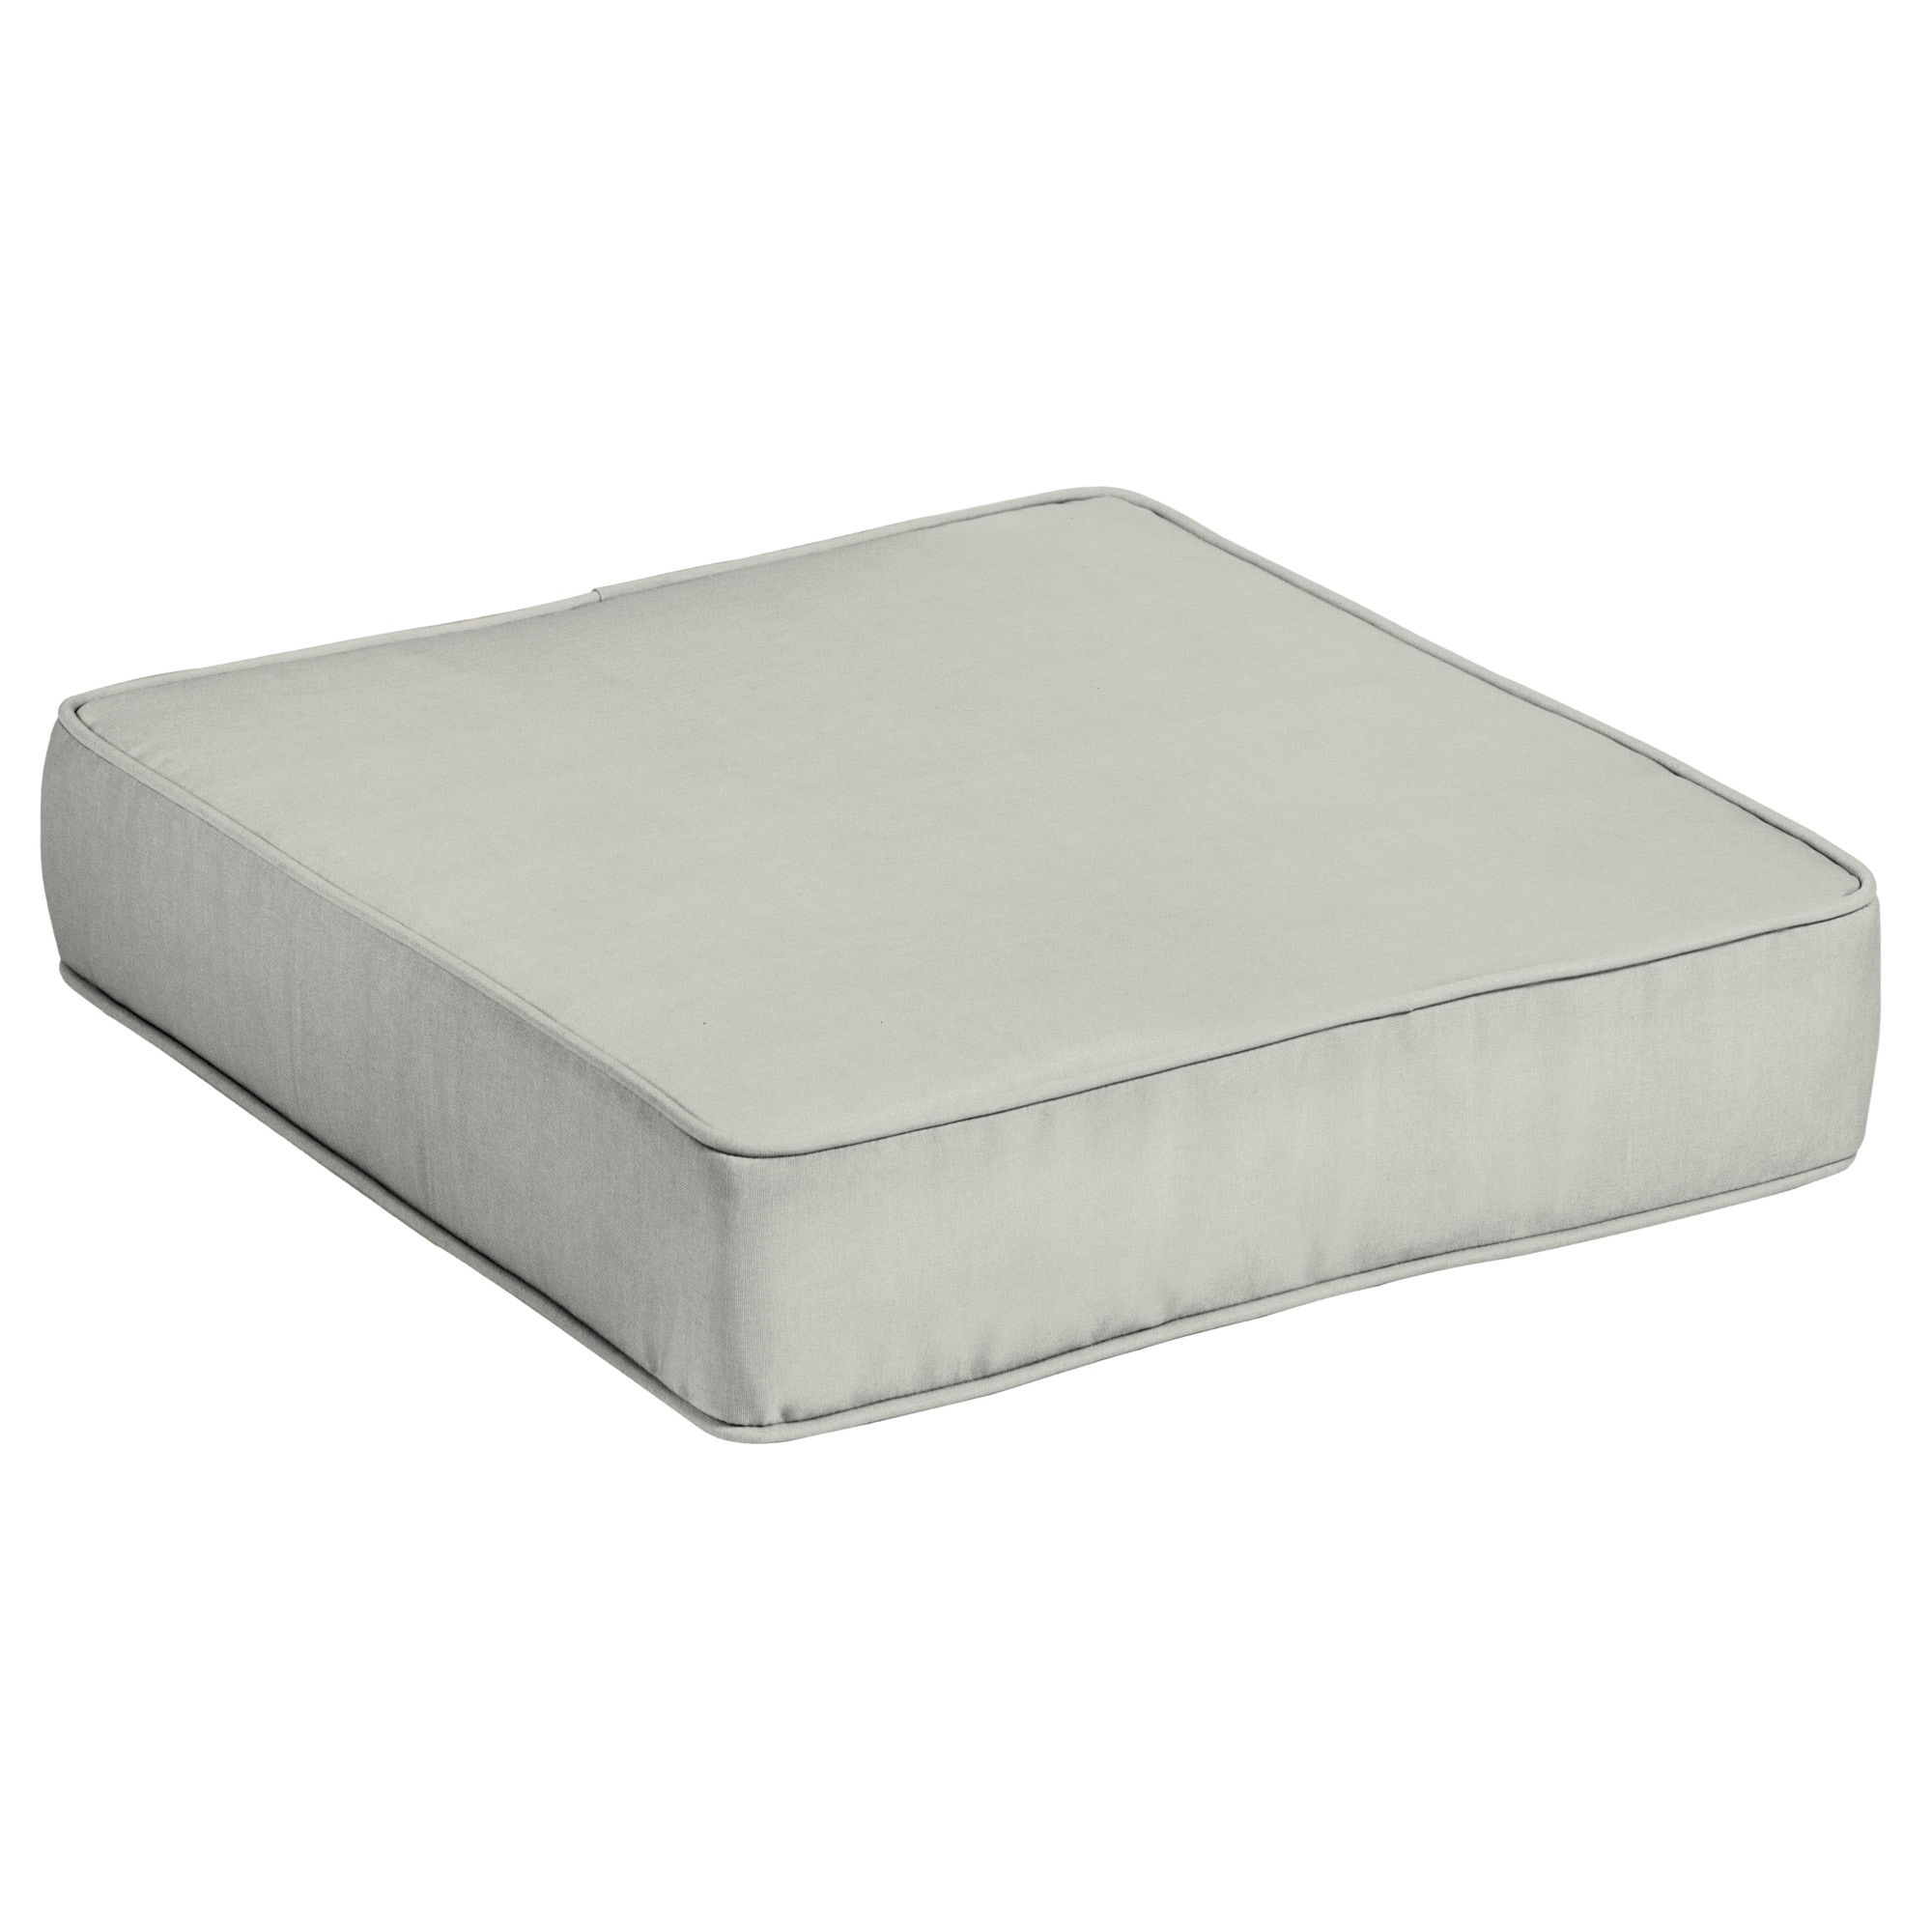 allen + roth 25-in x 25-in Grey Solid Deep Seat Patio Chair Cushion in the  Patio Furniture Cushions department at